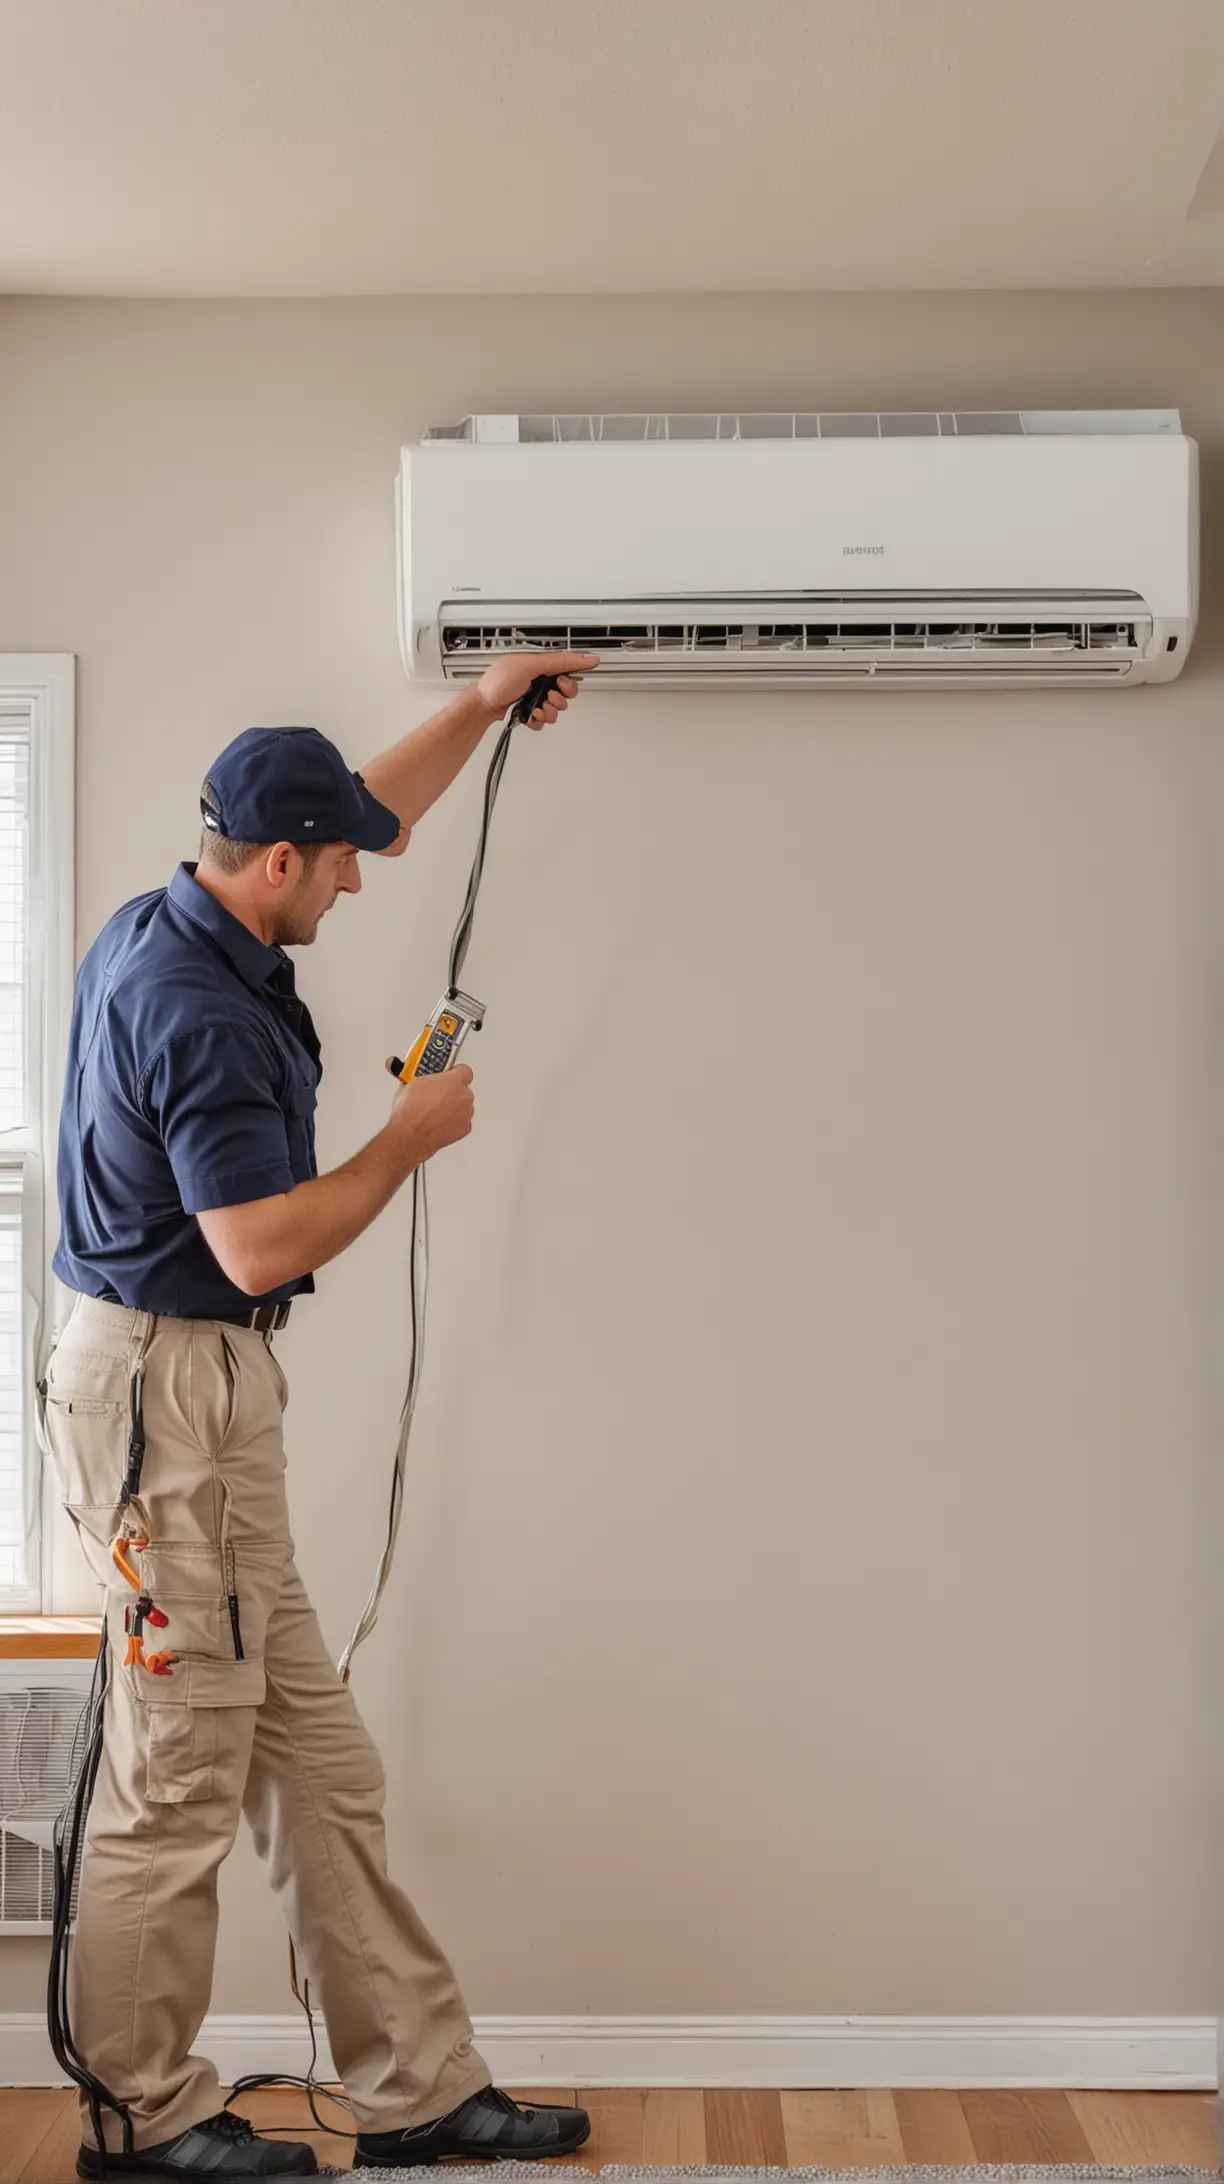 Create a realistic image of a professional Ductless Mini Split technician servicing an air conditioning unit inside a modern living room. The technician should be wearing a uniform and safety gear, with tools in hand, while examining the AC unit.